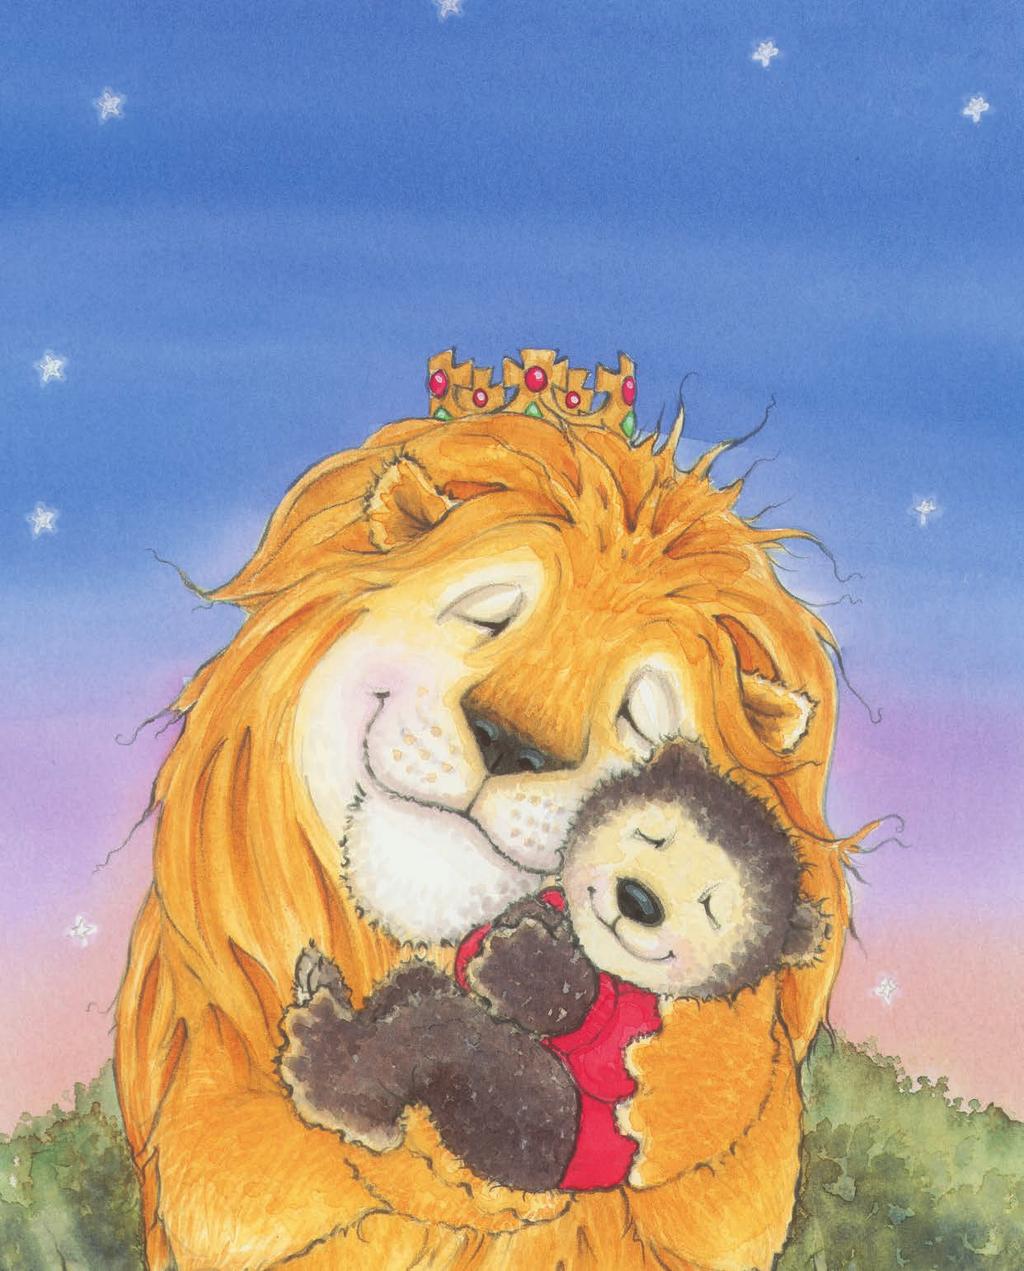 You are the perfect gift! the King told the little bear. You came to me when you needed help. You trusted me.